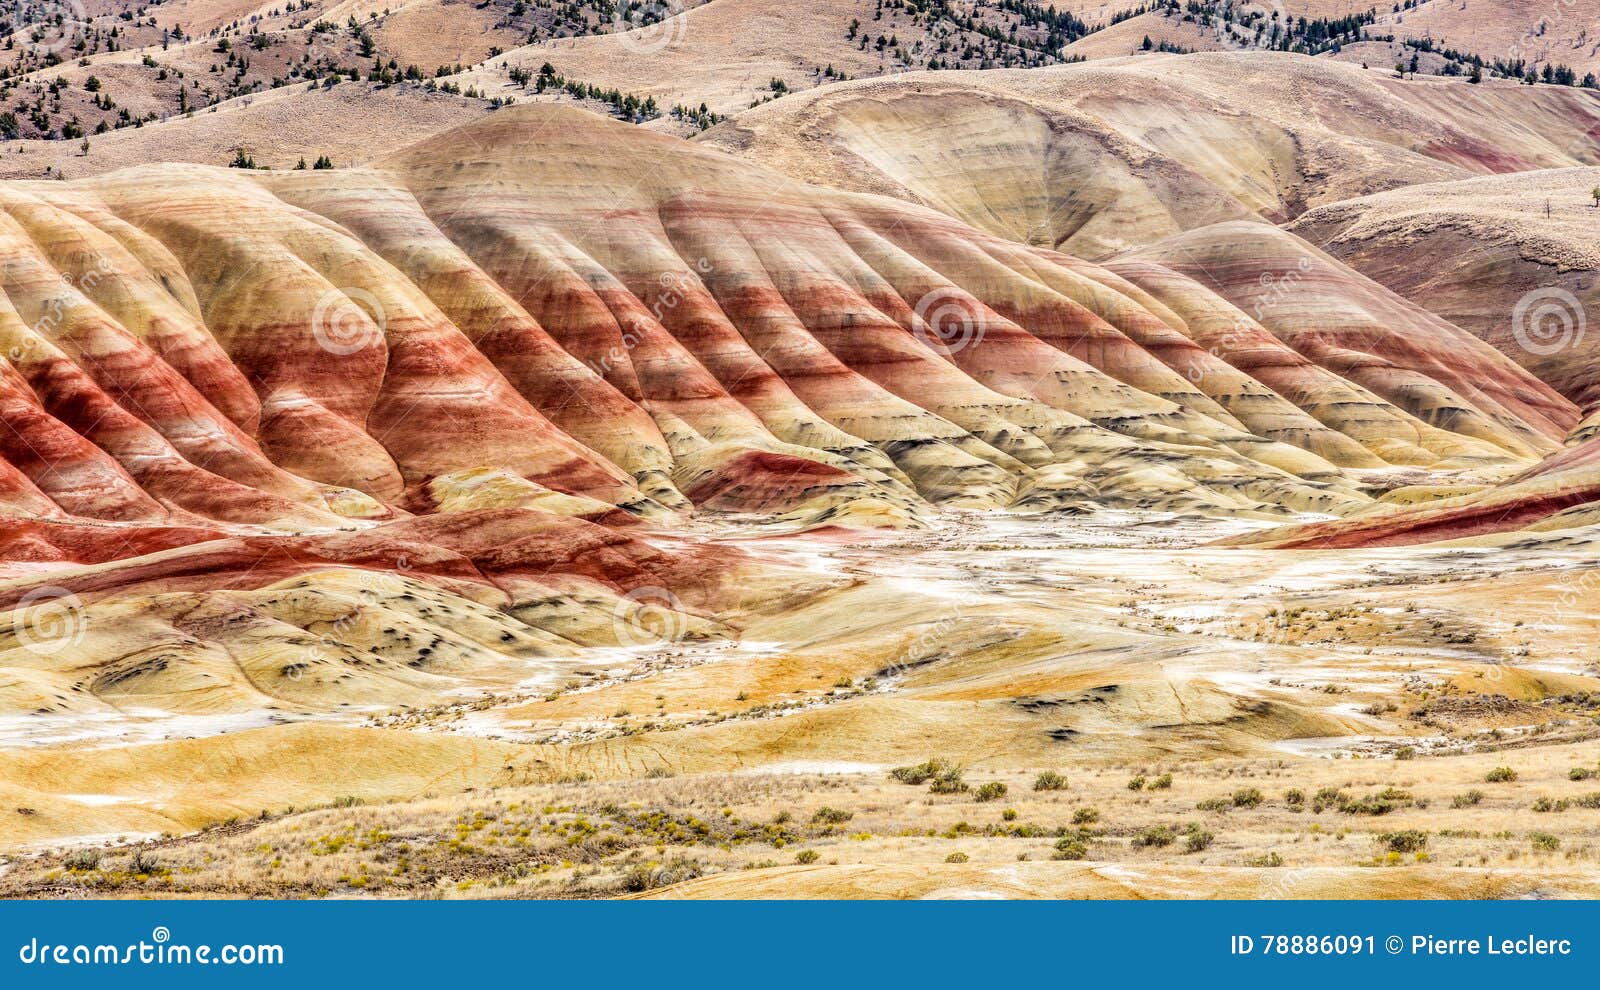 the painted hills of john day fossil beds